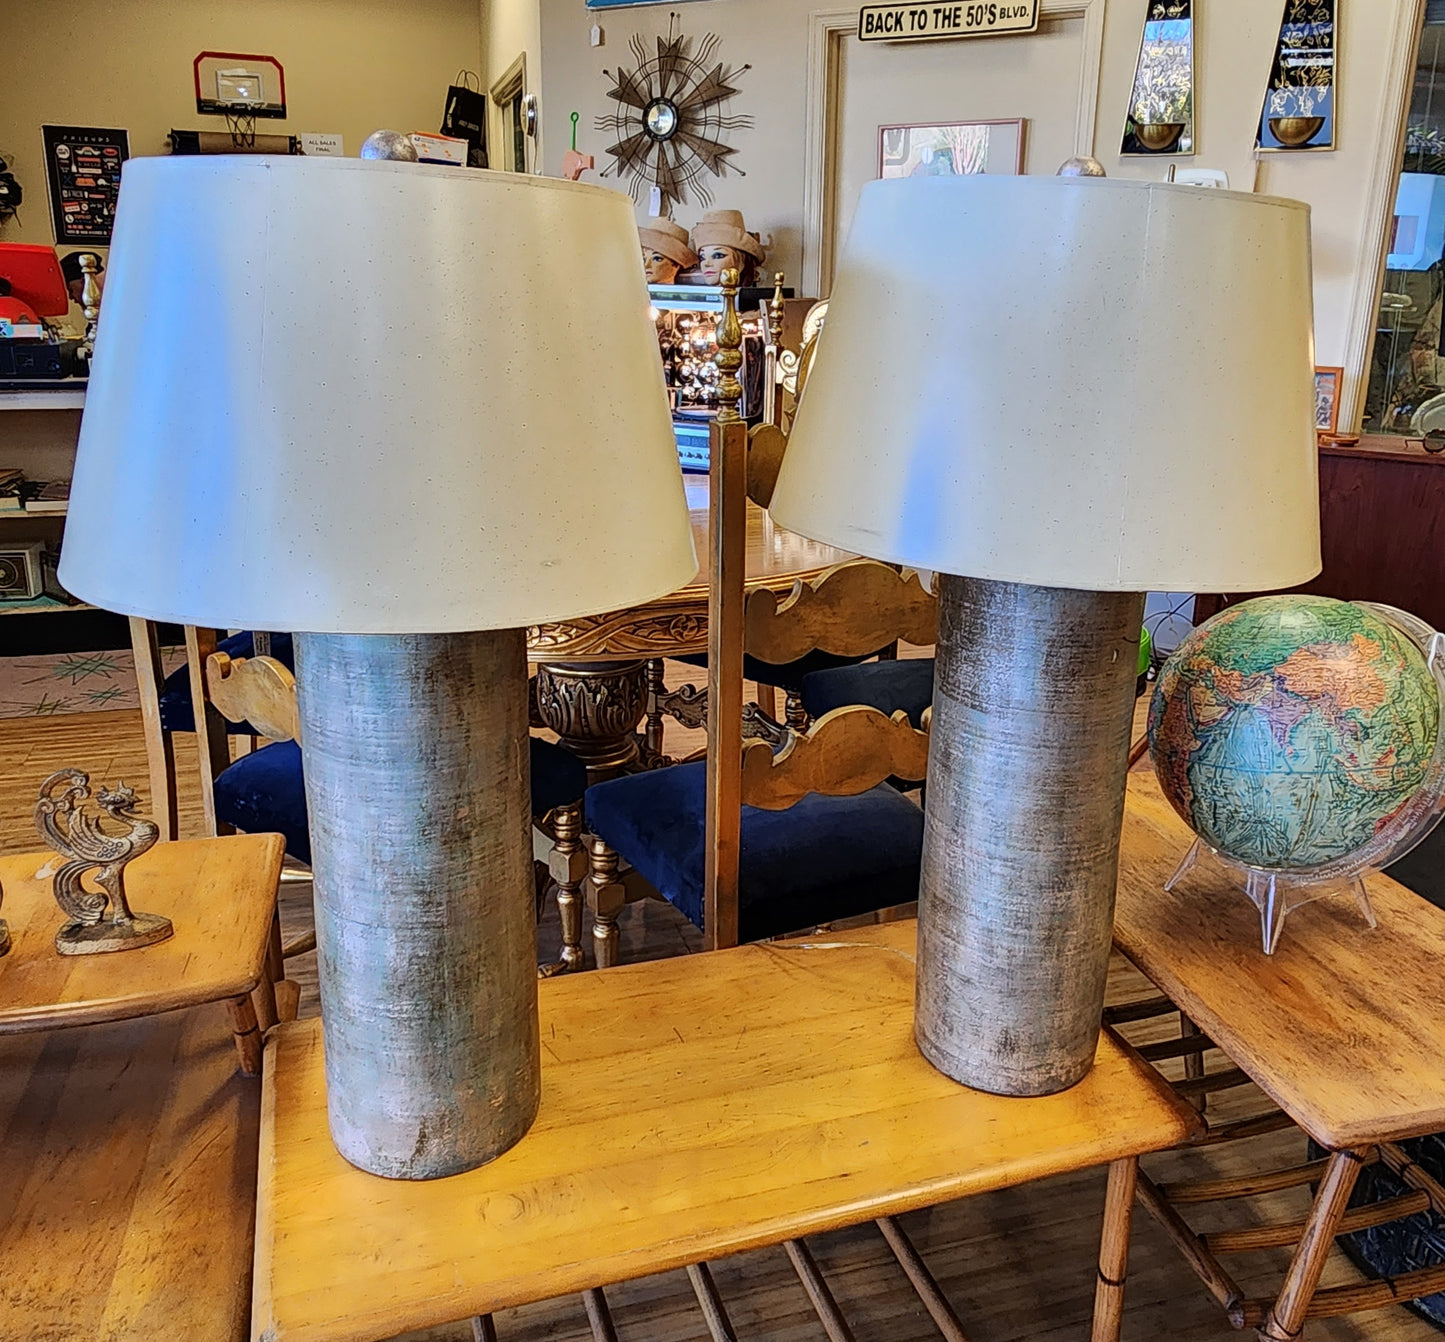 Pair of Signed Shagreen-Style Cylinder Pottery Table Lamps